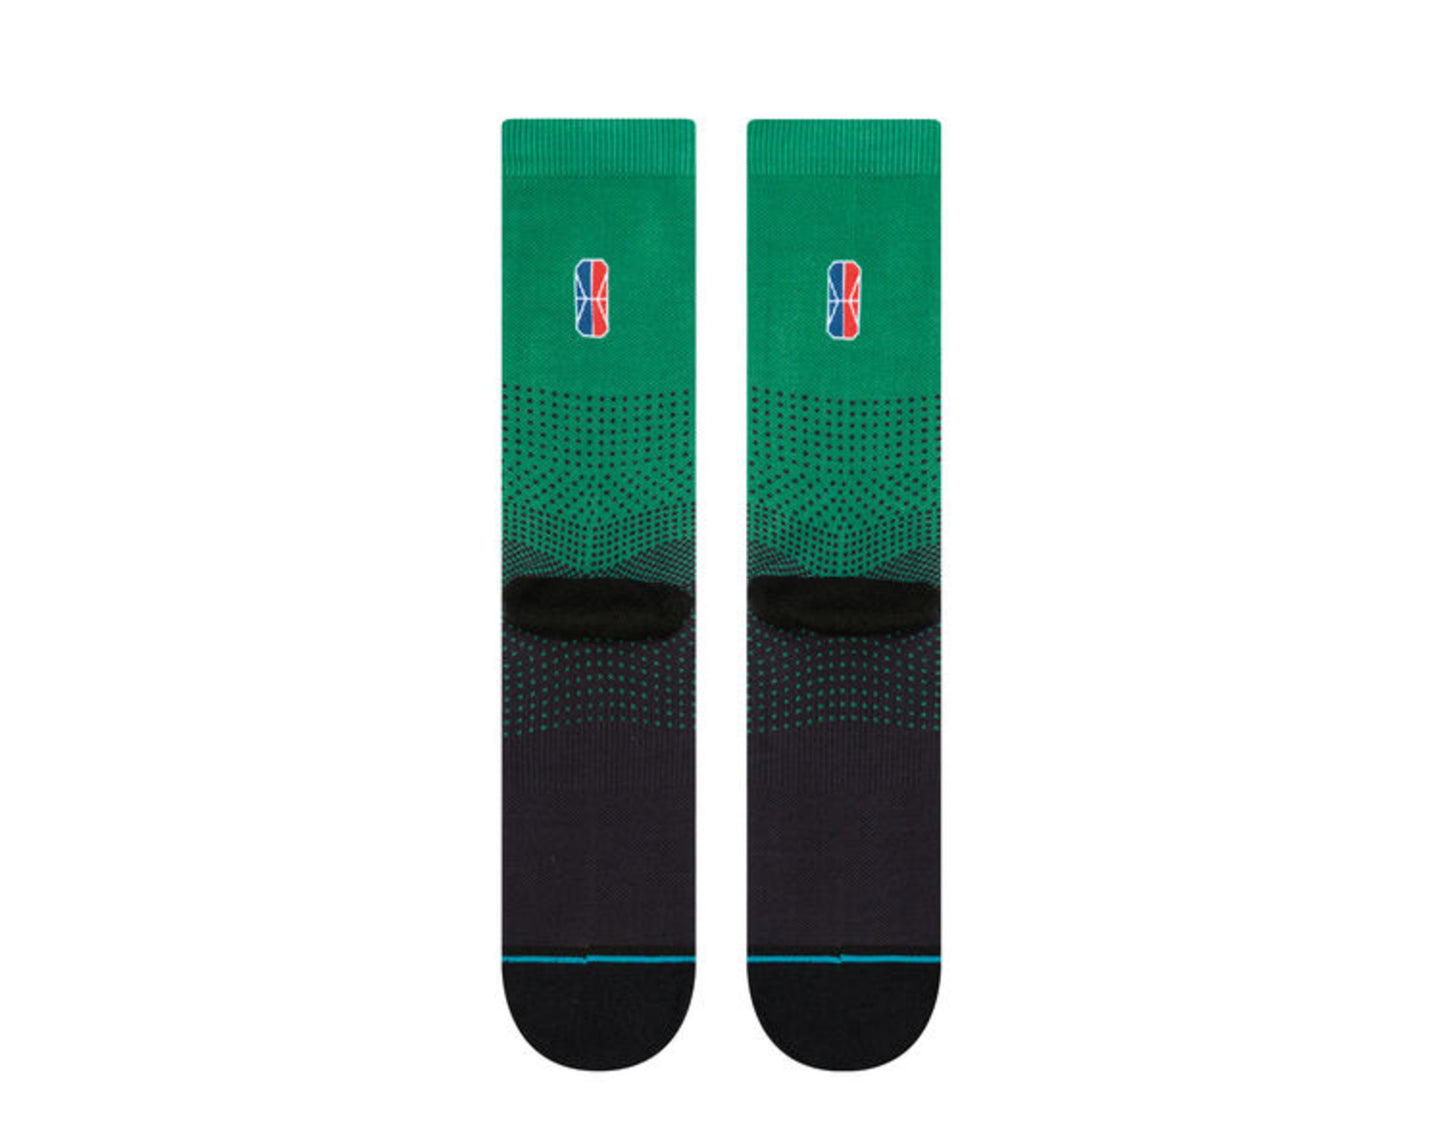 Stance Casual NBA Celtics Gaming Crossover 2K Green Crew Socks M558A19CCR-GRN